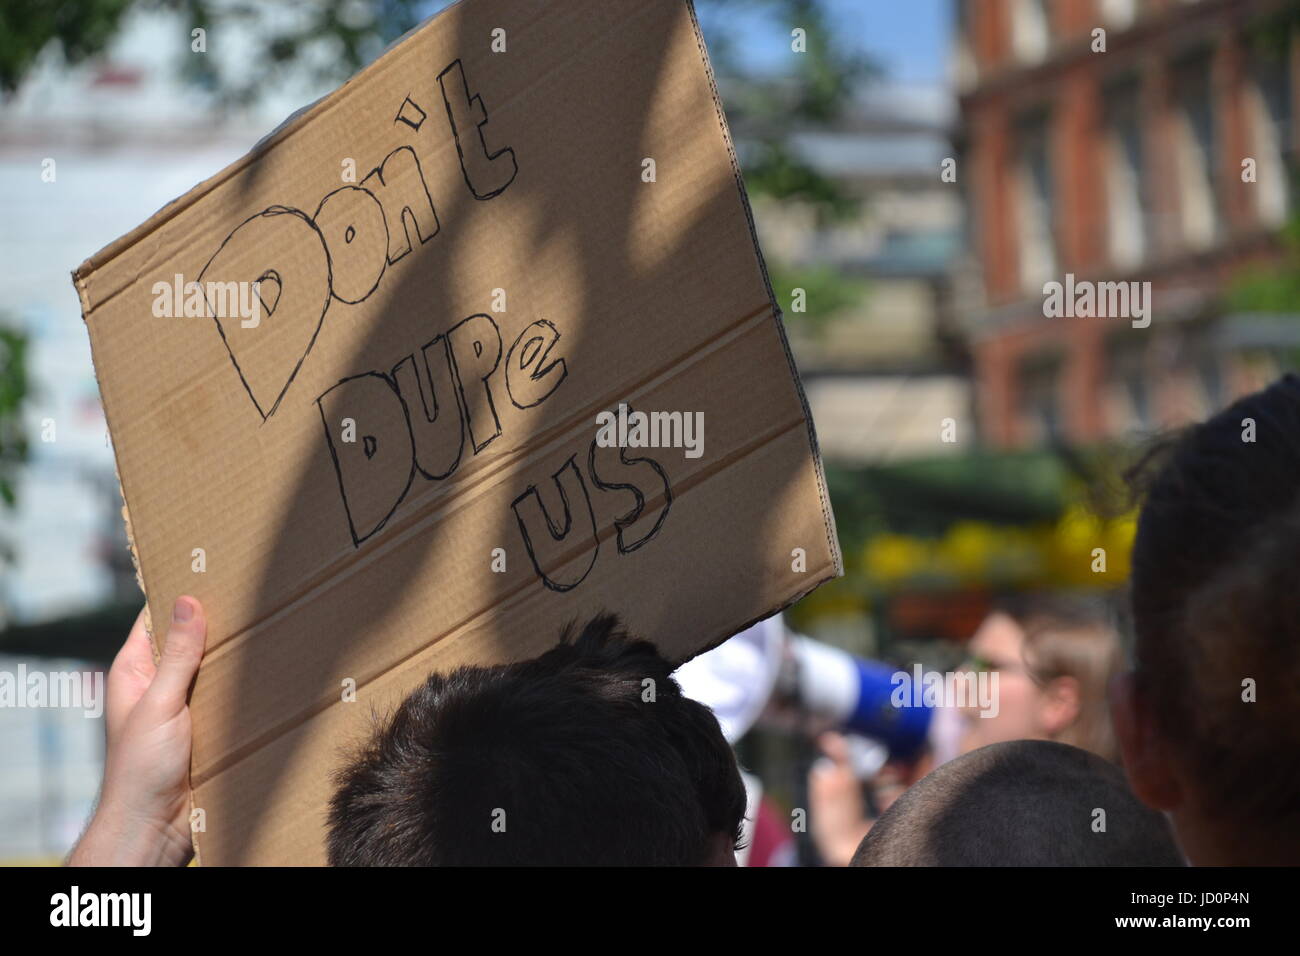 Manchester, UK. 17th June, 2017. Protestors take part in a march against the Tory-DUP government with placards and posters. ‘Justice for Grenfell: Tories Out, No DUP’ protest organised by members of the Socialist Worker’s Party, Labour Party and Jeremy Corbyn supporters in Manchester Albert Square on Saturday 17th June 2017. Credit: Pablo O'Hana/Alamy Live News Stock Photo